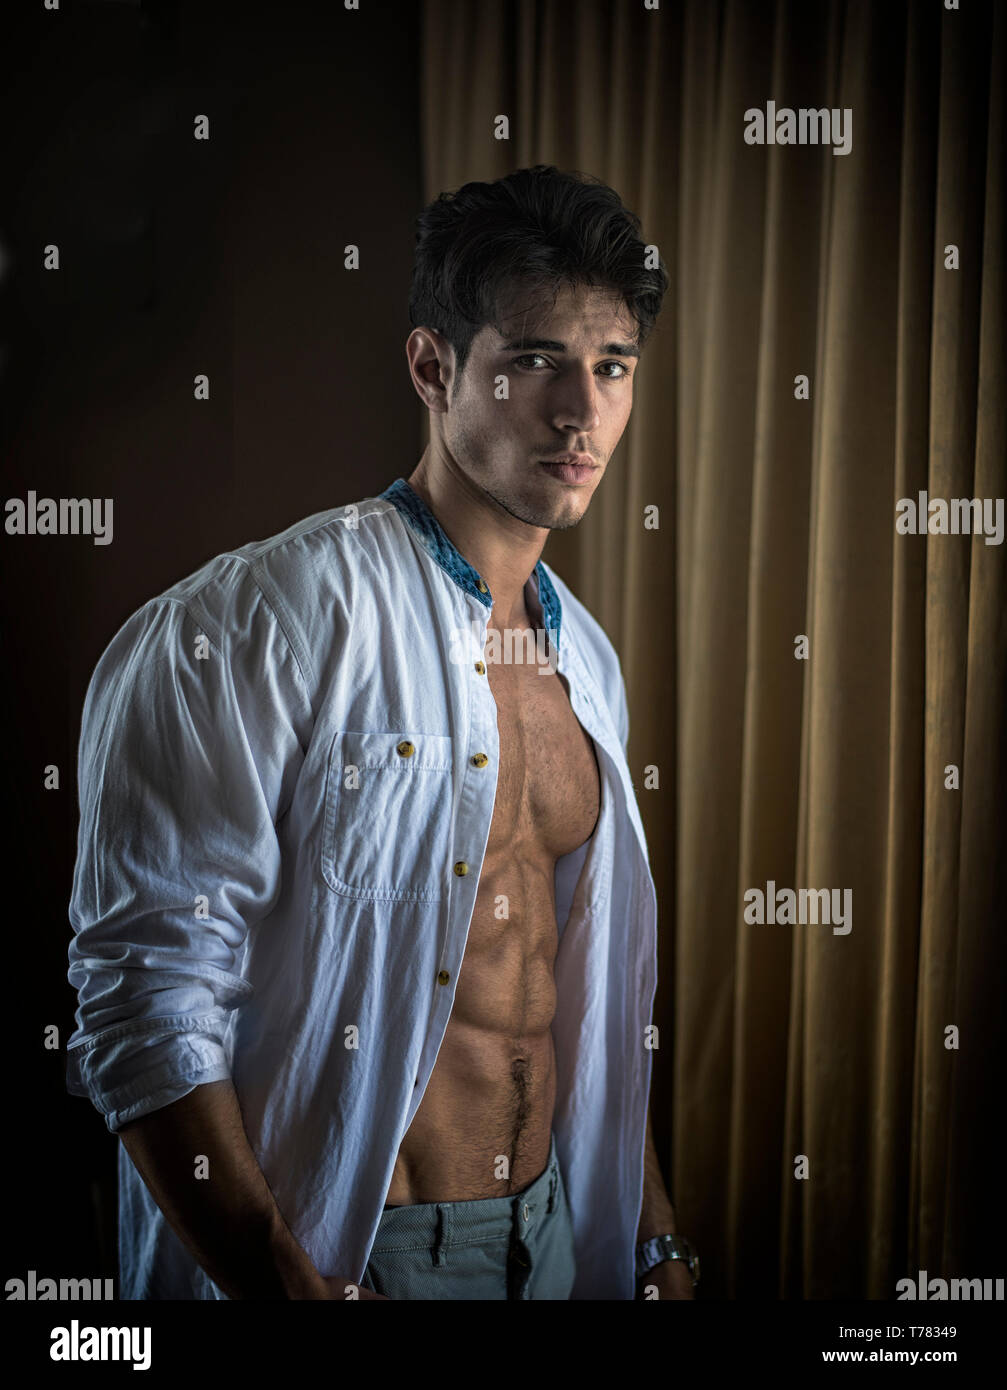 Sexy young man dressing by window curtains Stock Photo - Alamy